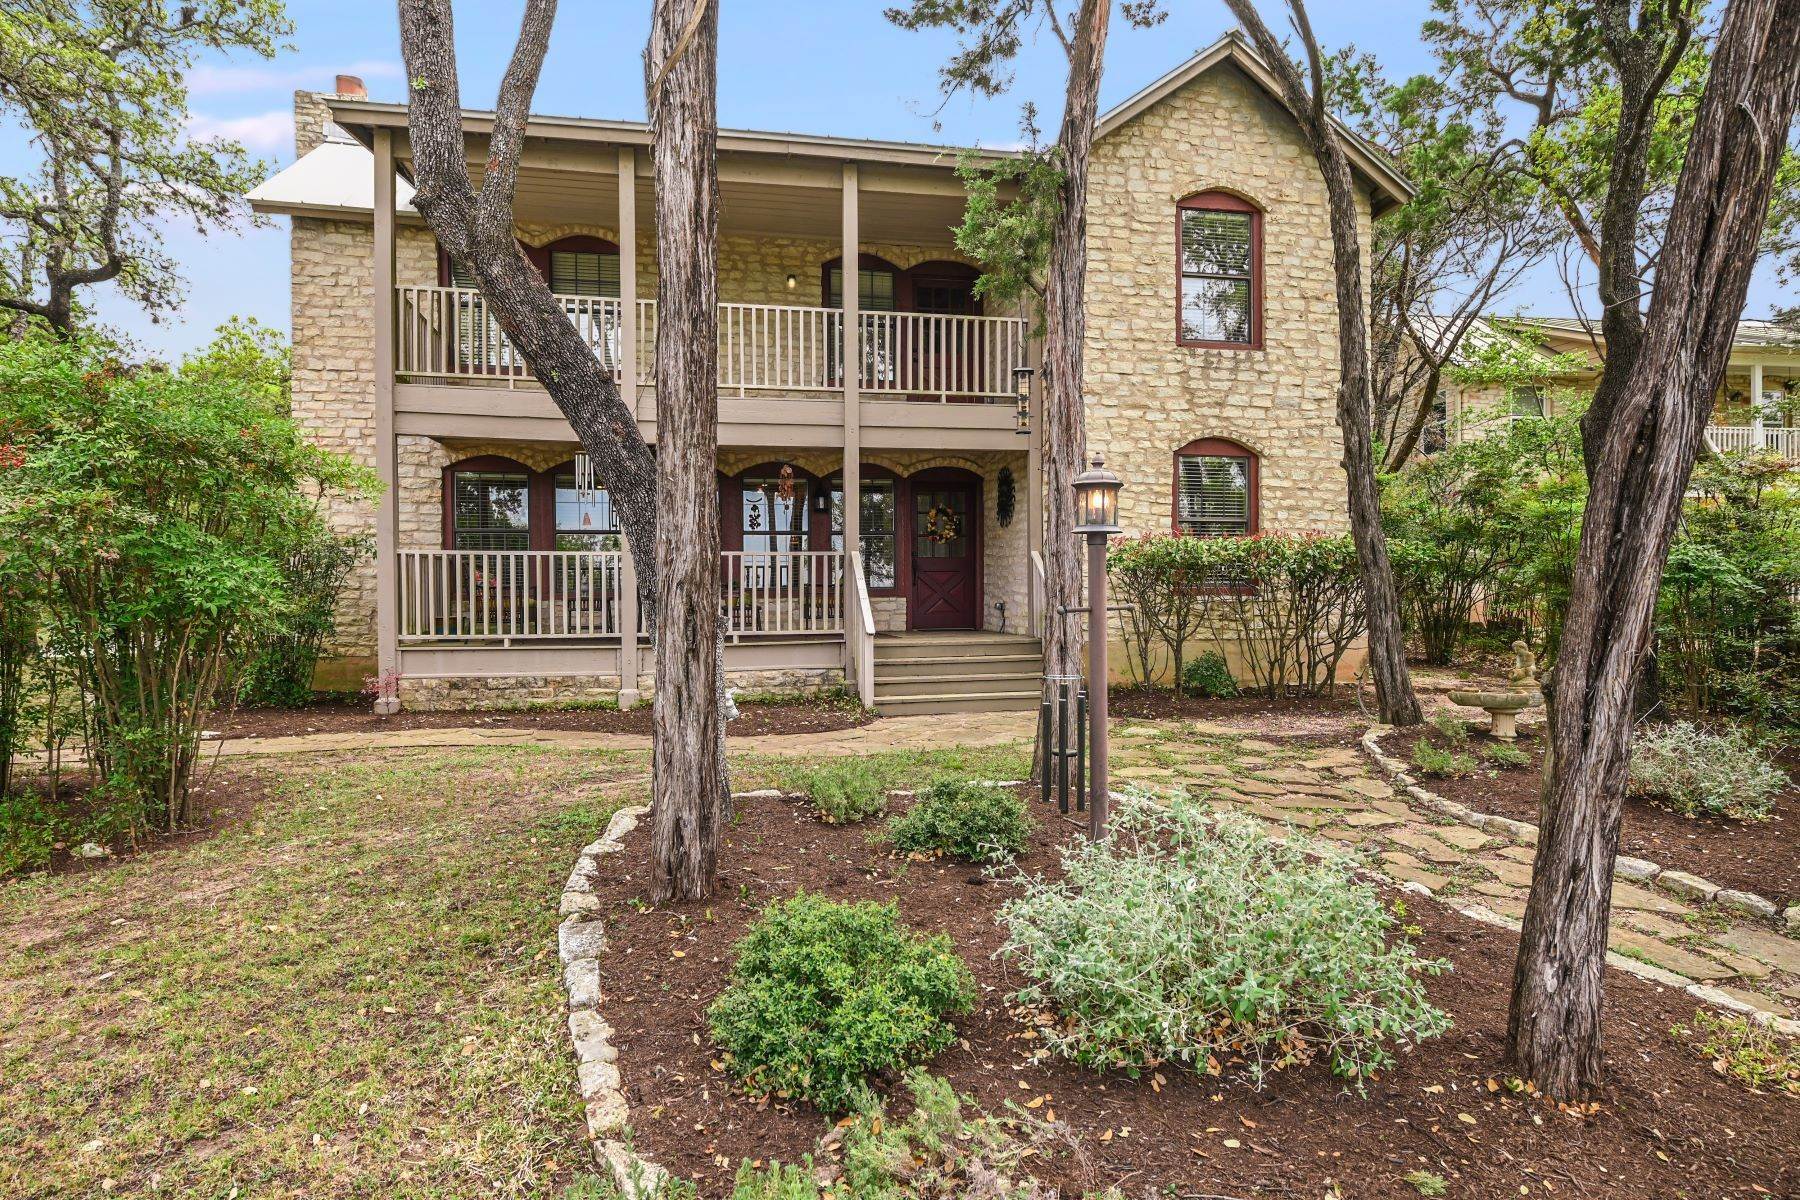 Single Family Homes for Sale at 8450 Spicewood Springs Road, Austin, TX 78759 8450 Spicewood Springs Road Austin, Texas 78759 United States